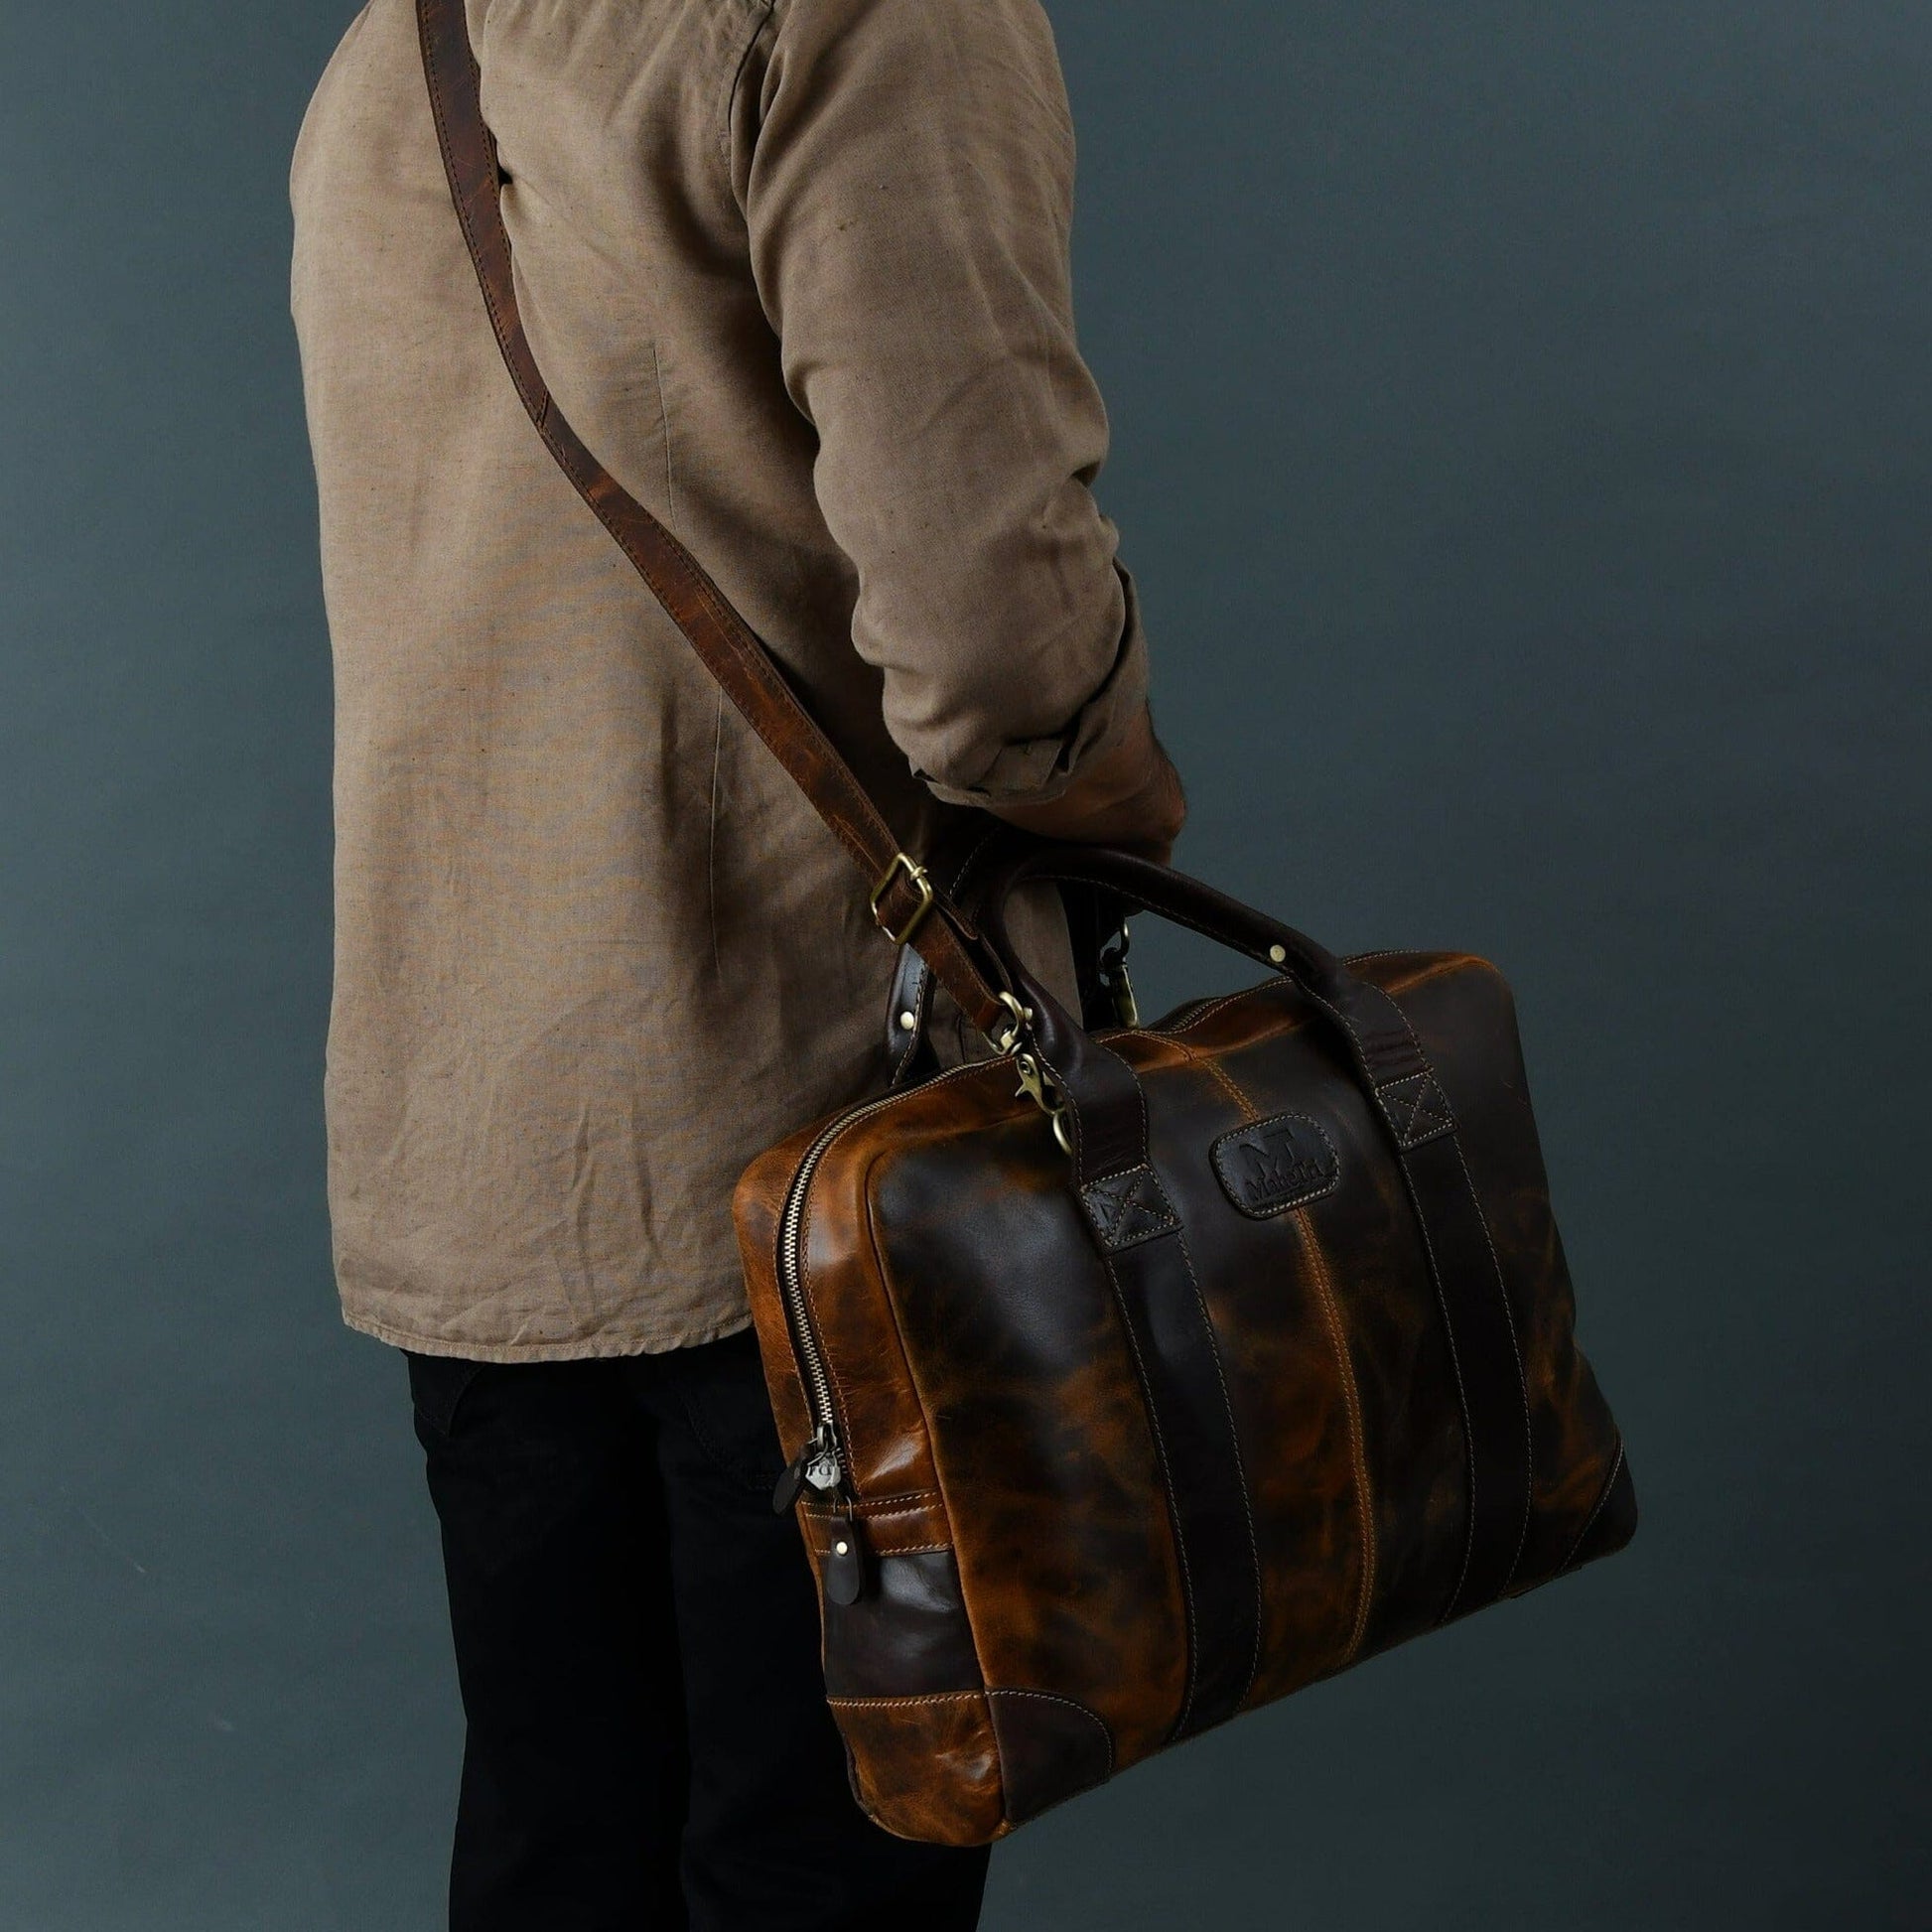 Brown Jefferson Briefcase - The Tool Store